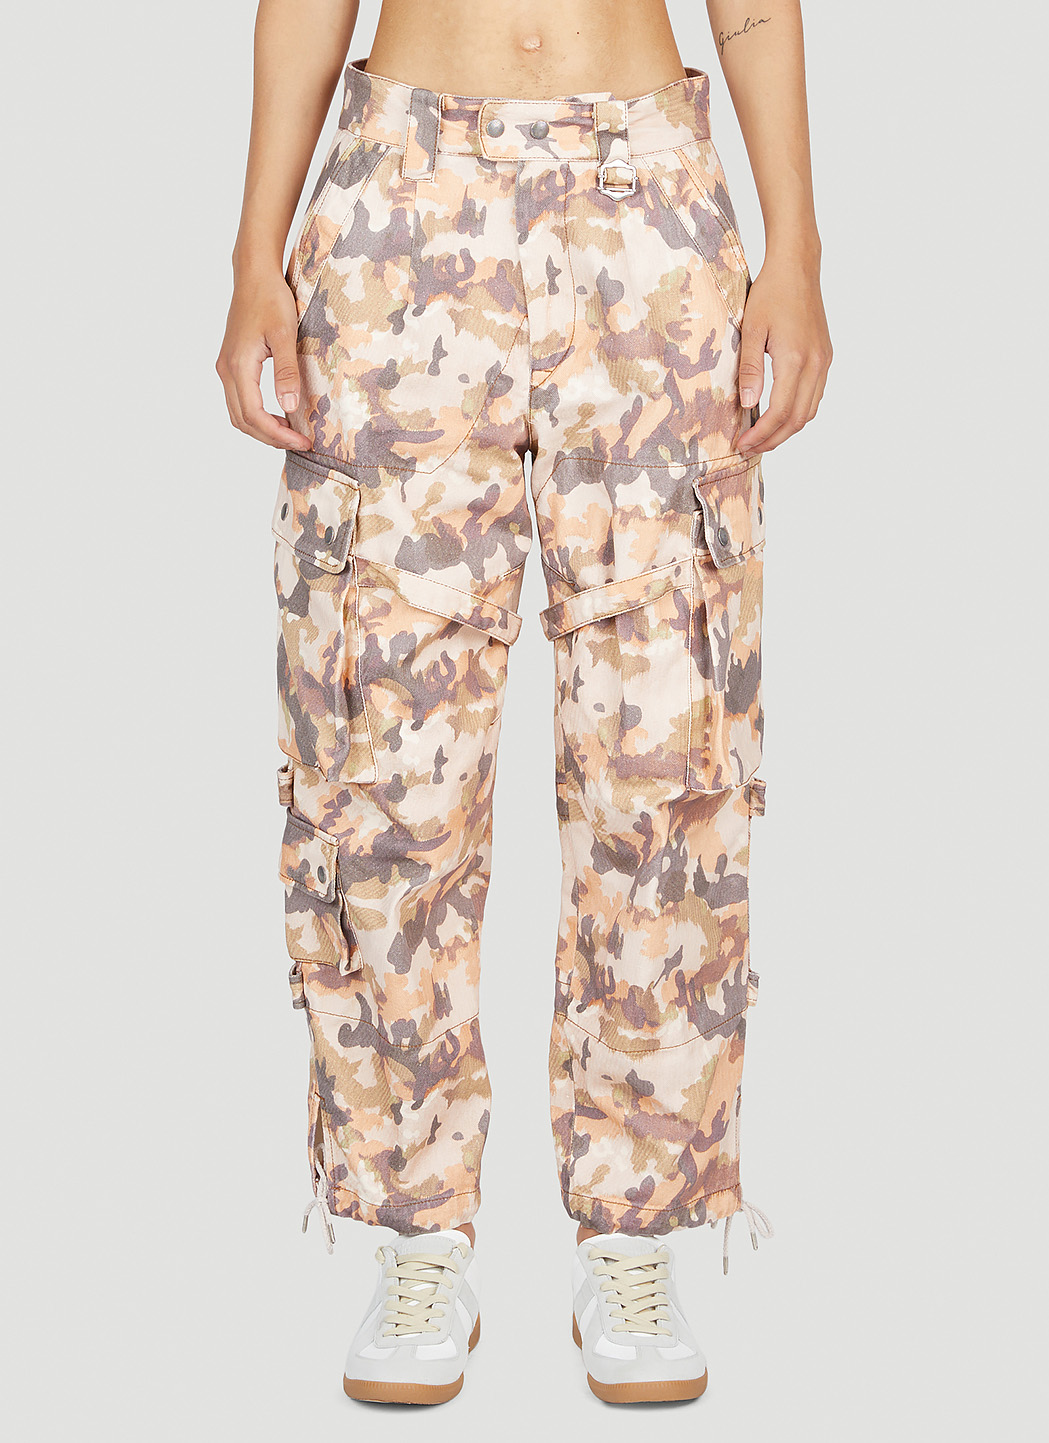 SWS, Pants & Jumpsuits, Camouflage Leggings Size Xl From Brand Sws